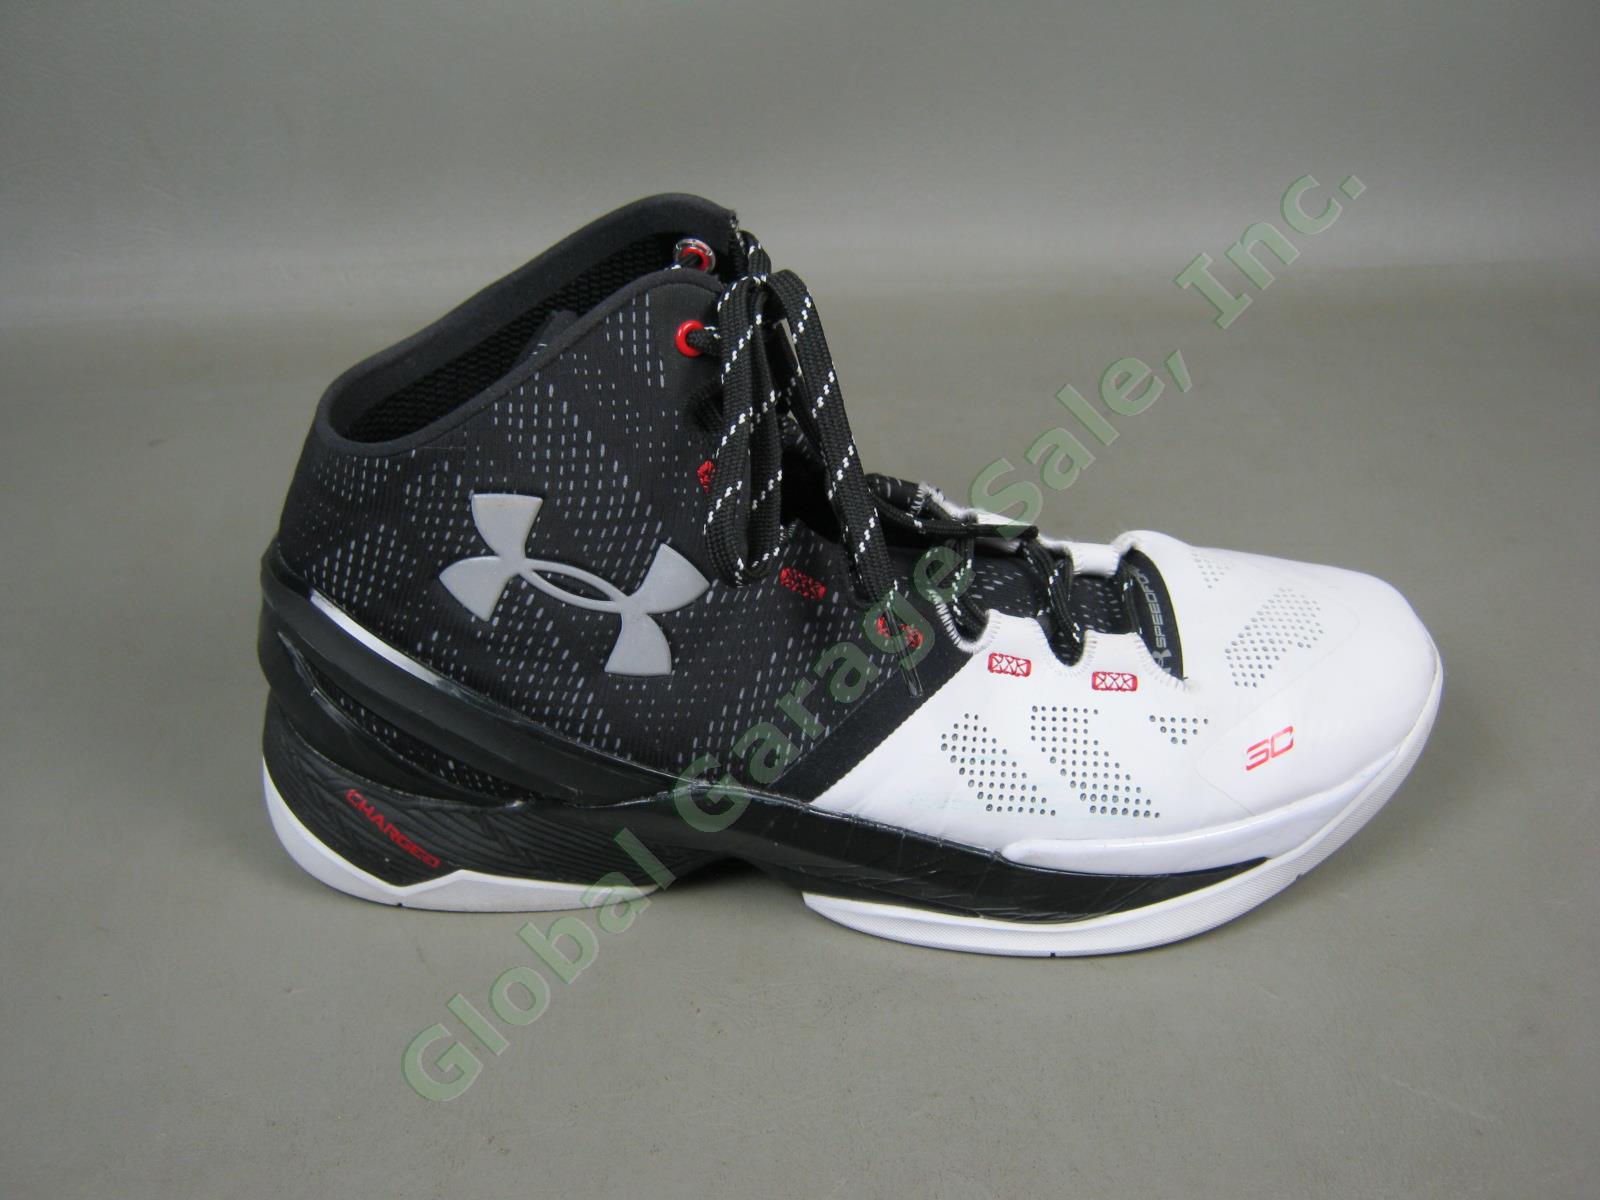 Under Armour Curry 2 Suit & Tie Black White Basketball Shoes 10.5 Pre-Owned/Used 4